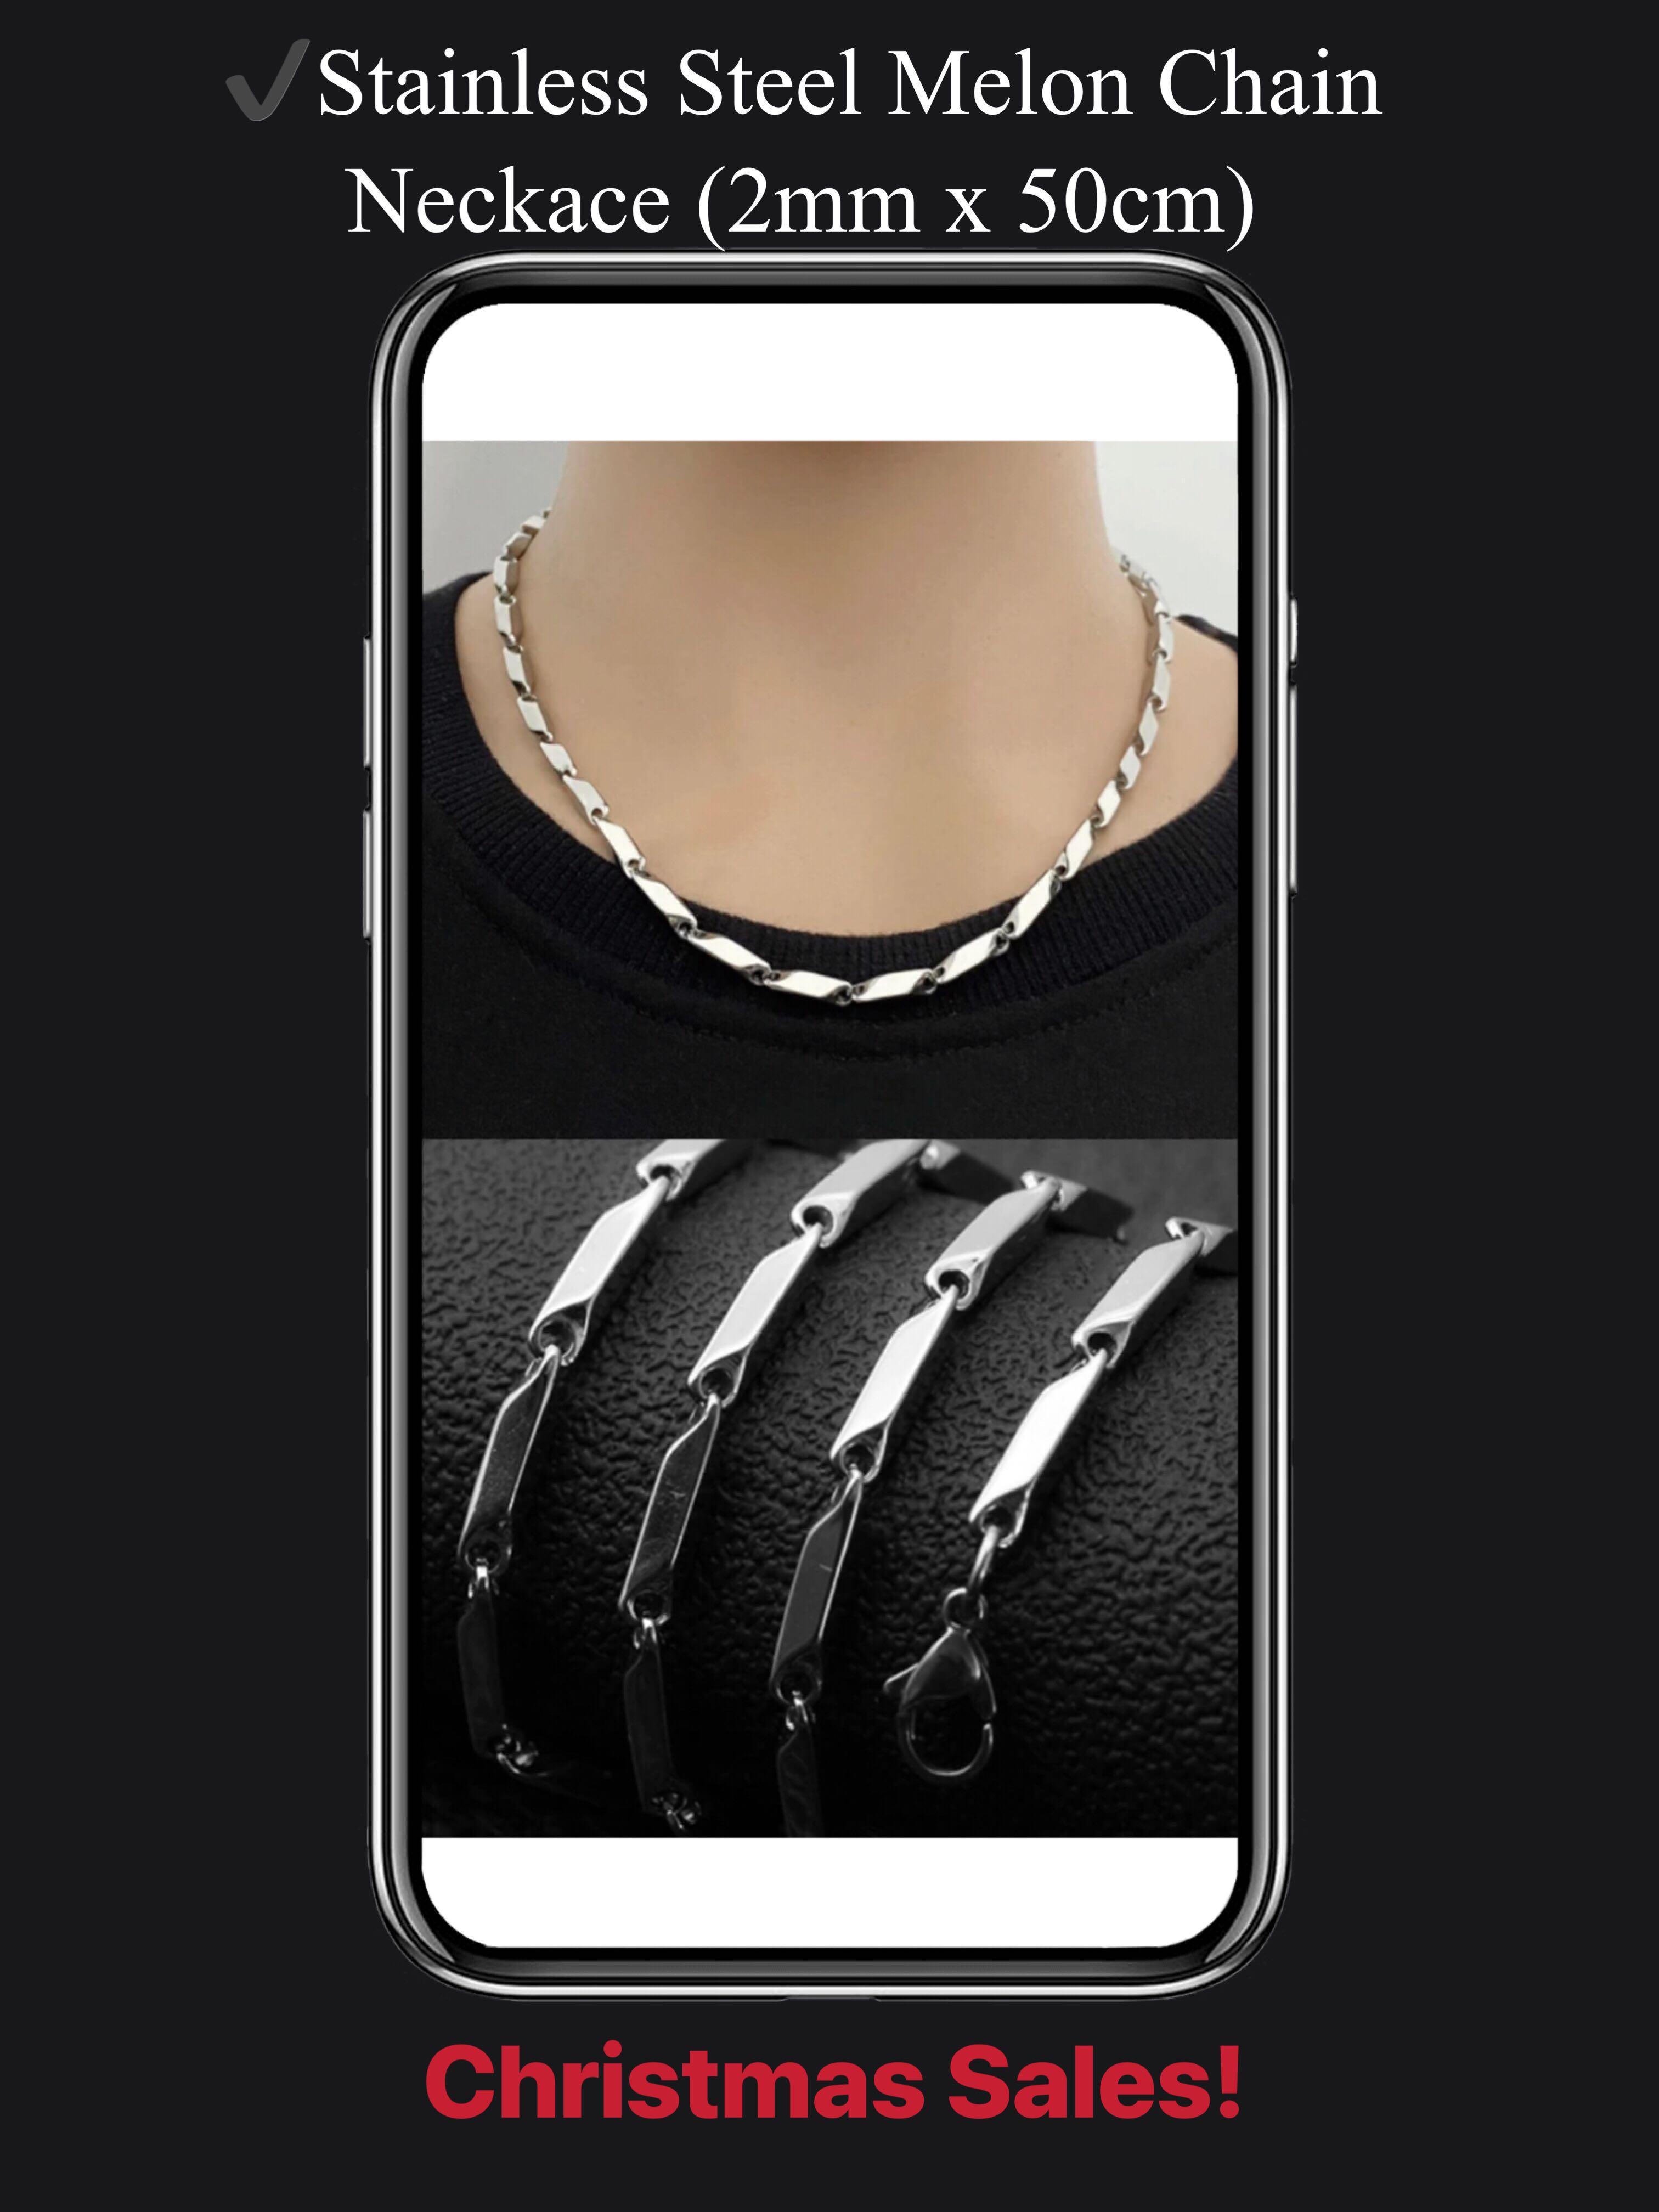 Necklace Fashion high-end new titanium steel necklace melon chain stainless steel chain men and women fashion necklace hot sale